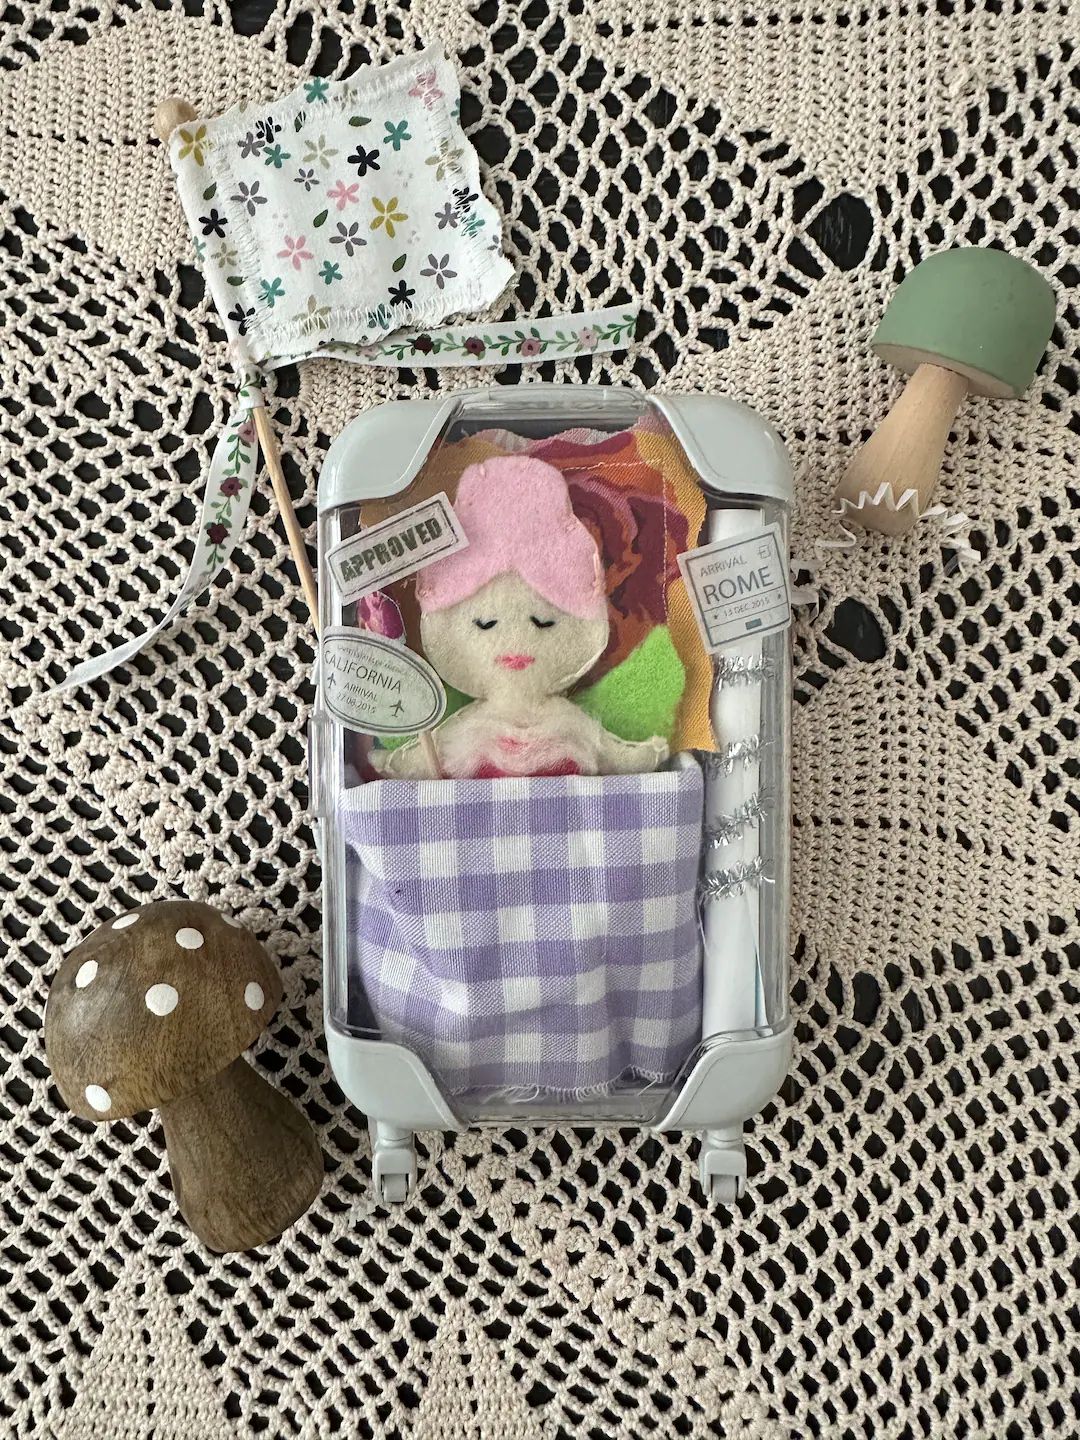 Adopt a Fairy with Traveling Suitcase (One Fairy) | Etsy (US)